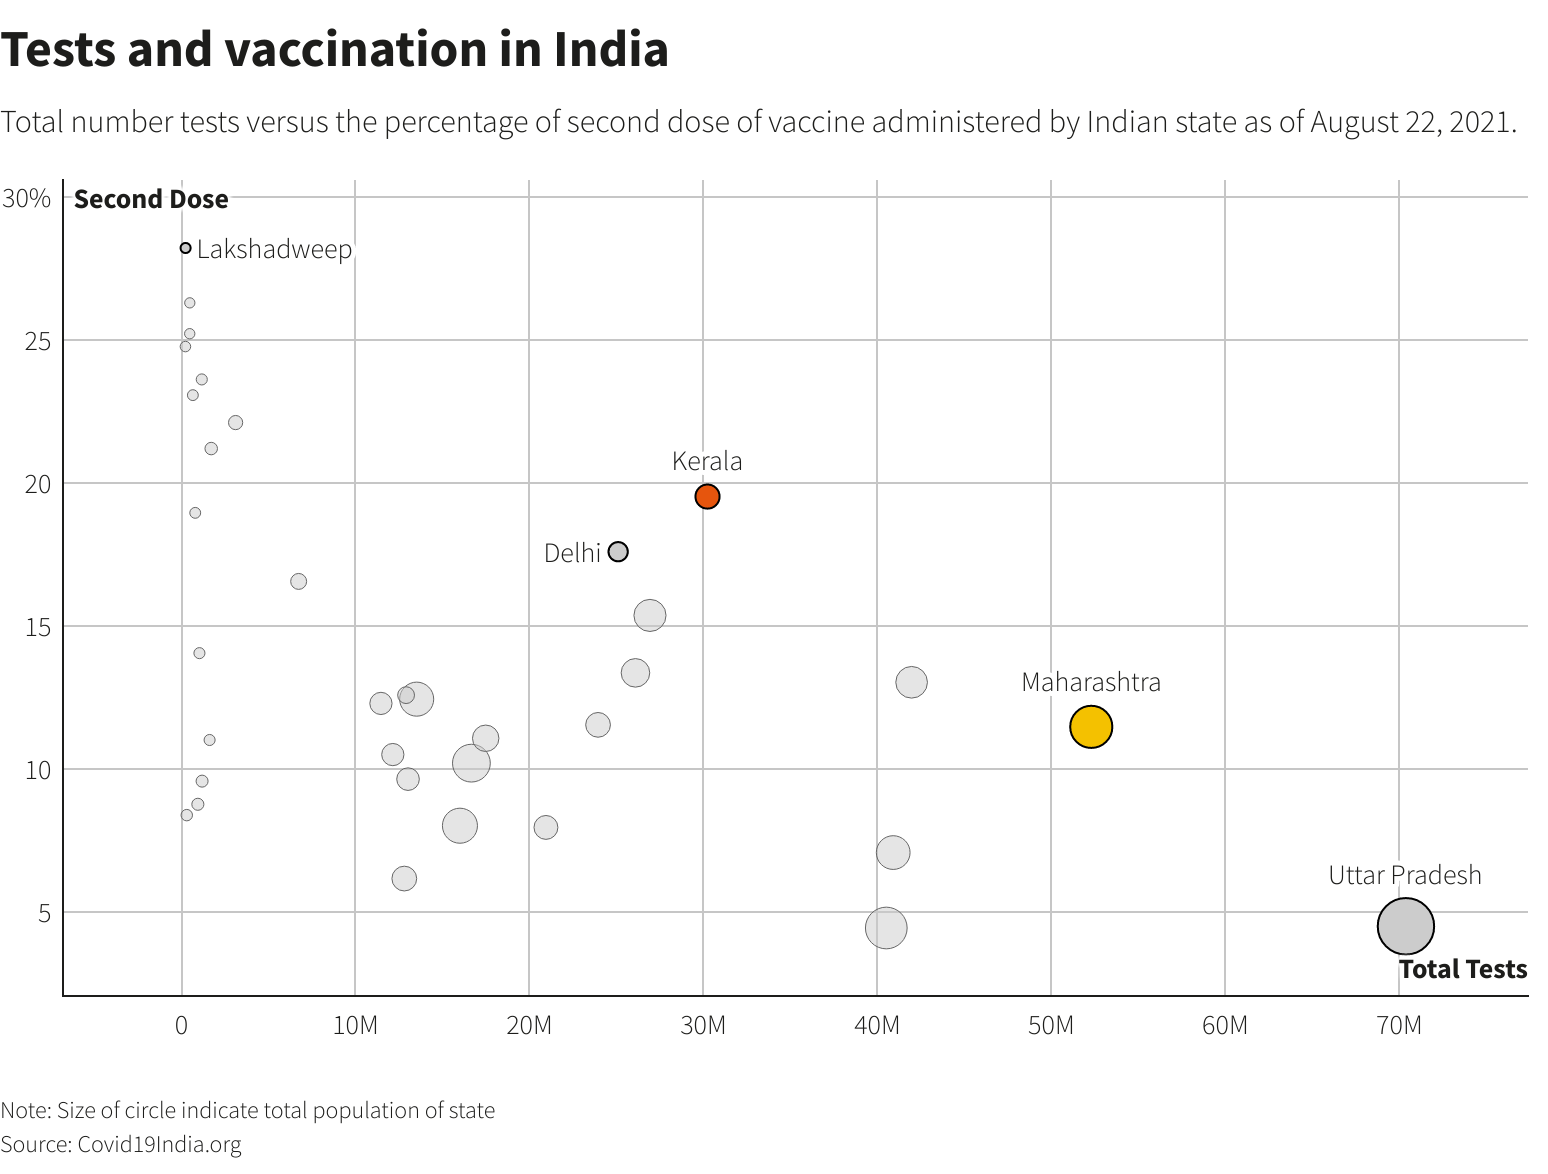 Tests and vaccination in India